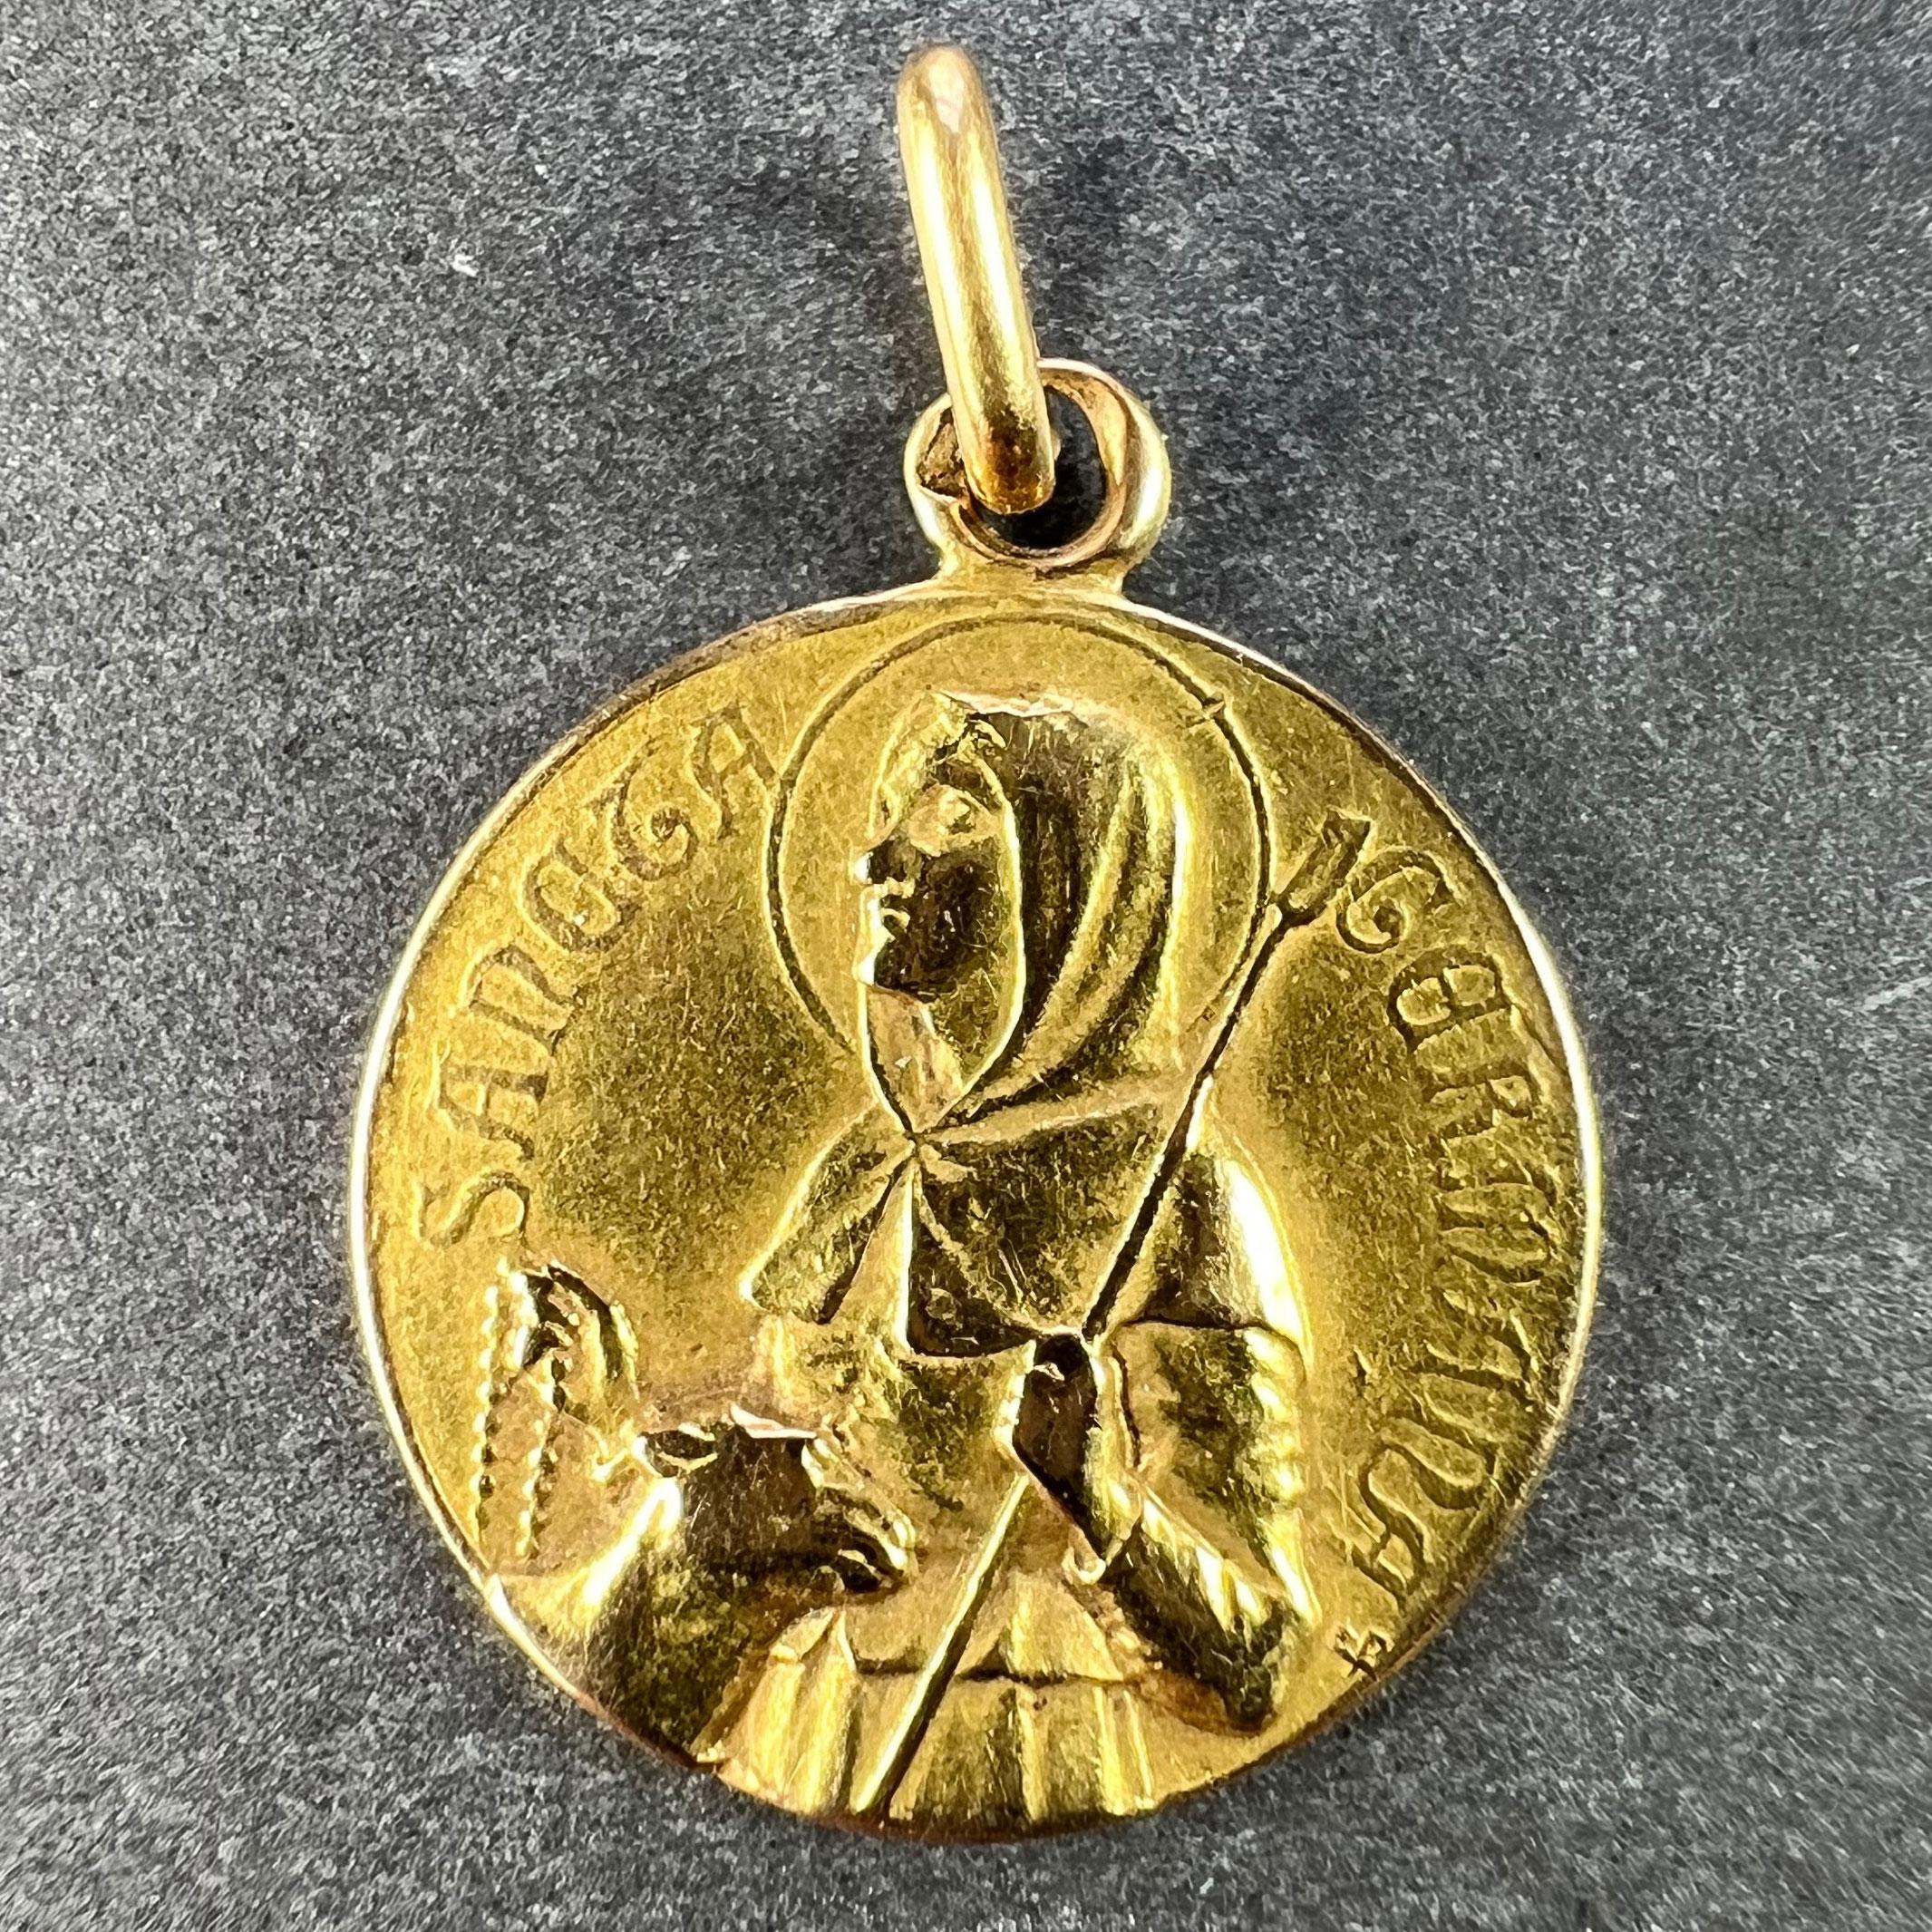 A French 18 karat (18K) yellow gold charm pendant designed as a medal depicting Saint Germaine as a shepherdess holding a rosary, with the name 'Sancta Germana' in raised letters surrounding it. The reverse depicts a lily and a spindle of wool.